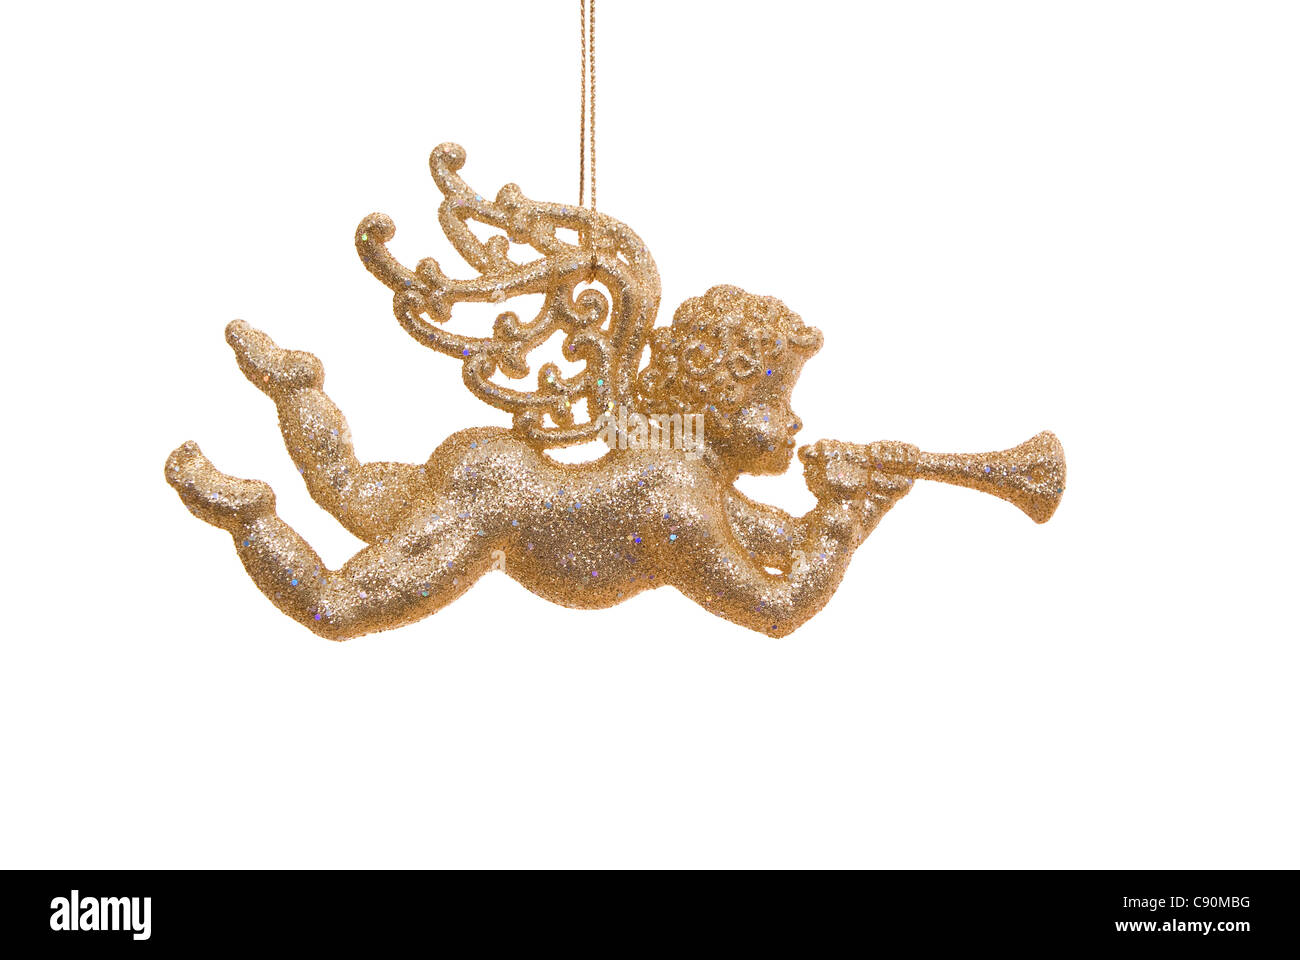 golden angel as decoration on Christmas tree Stock Photo